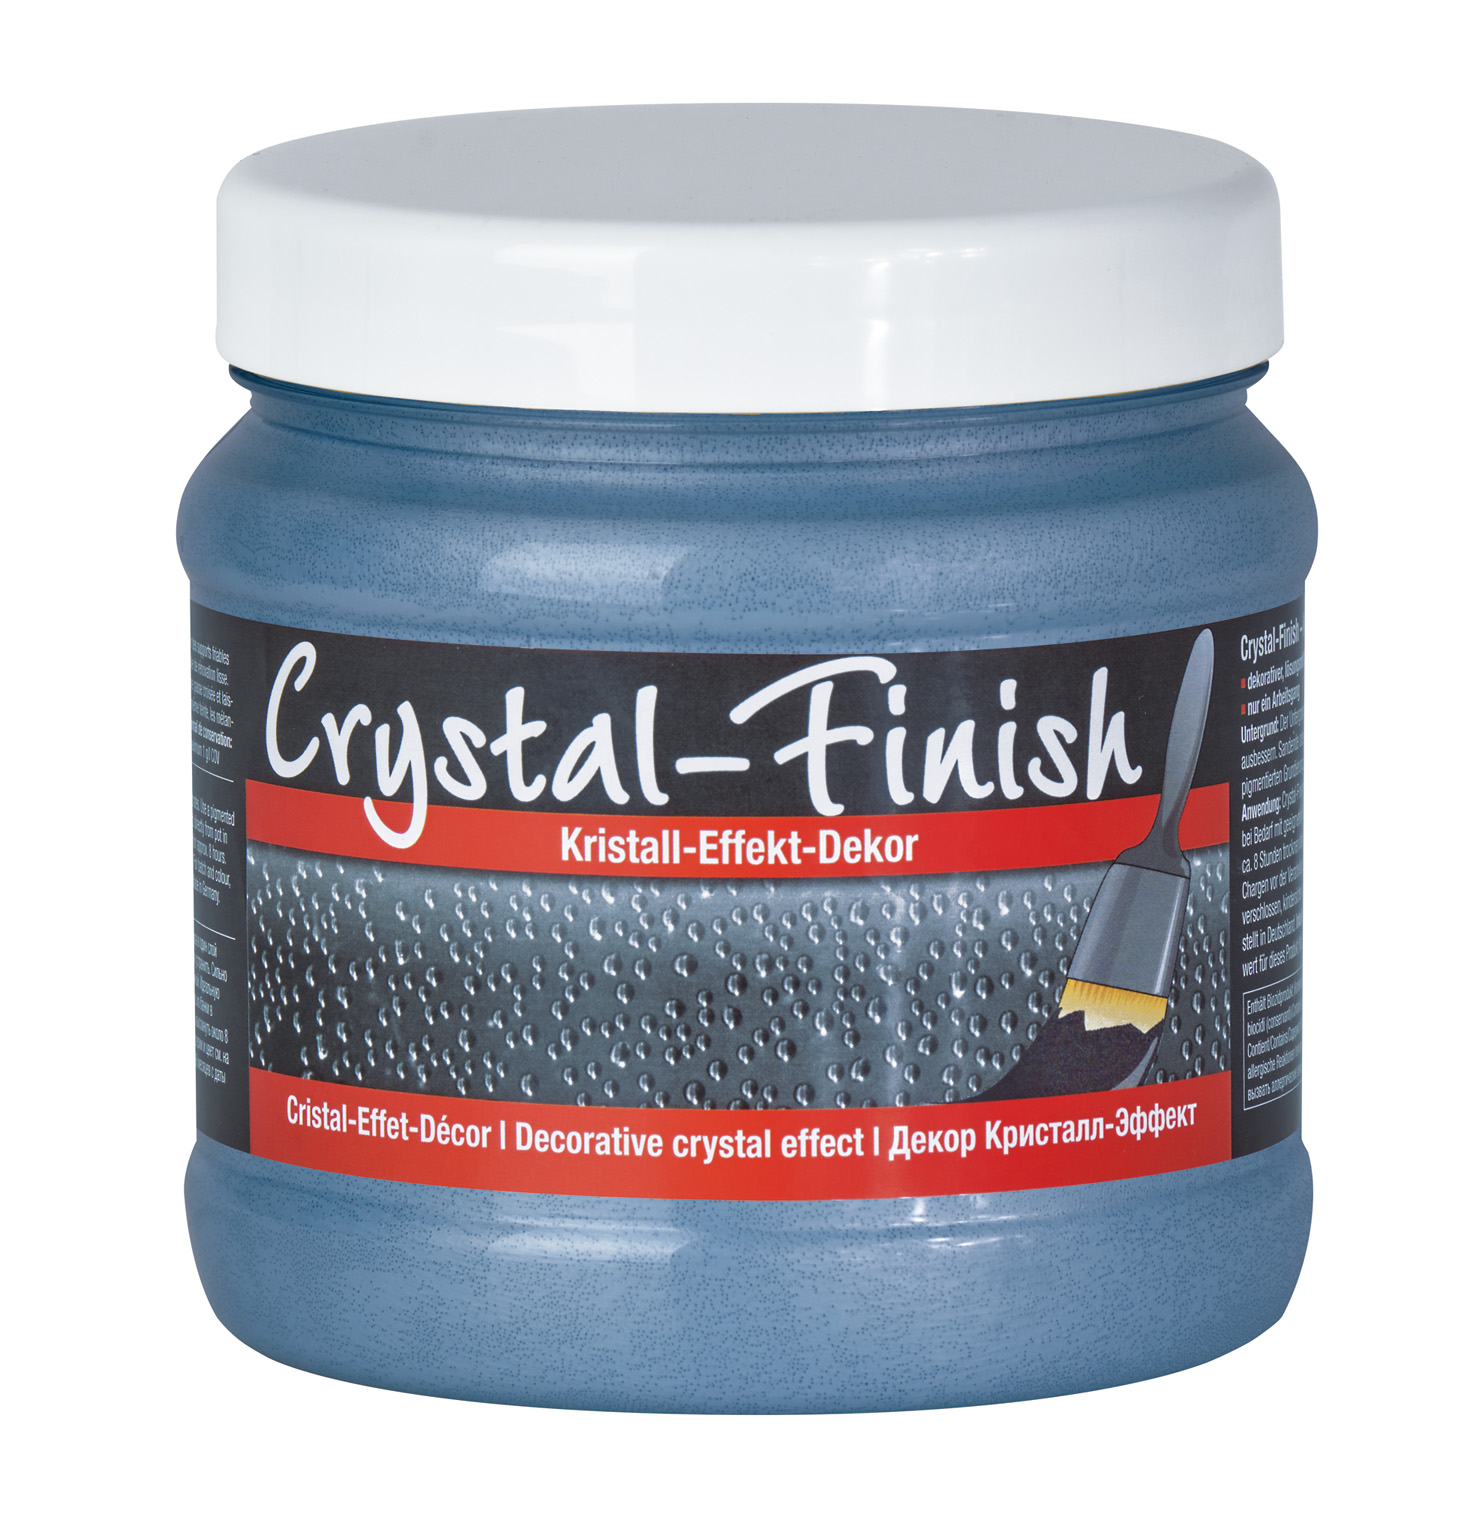 Decotric Crystal-Finish, Pacific